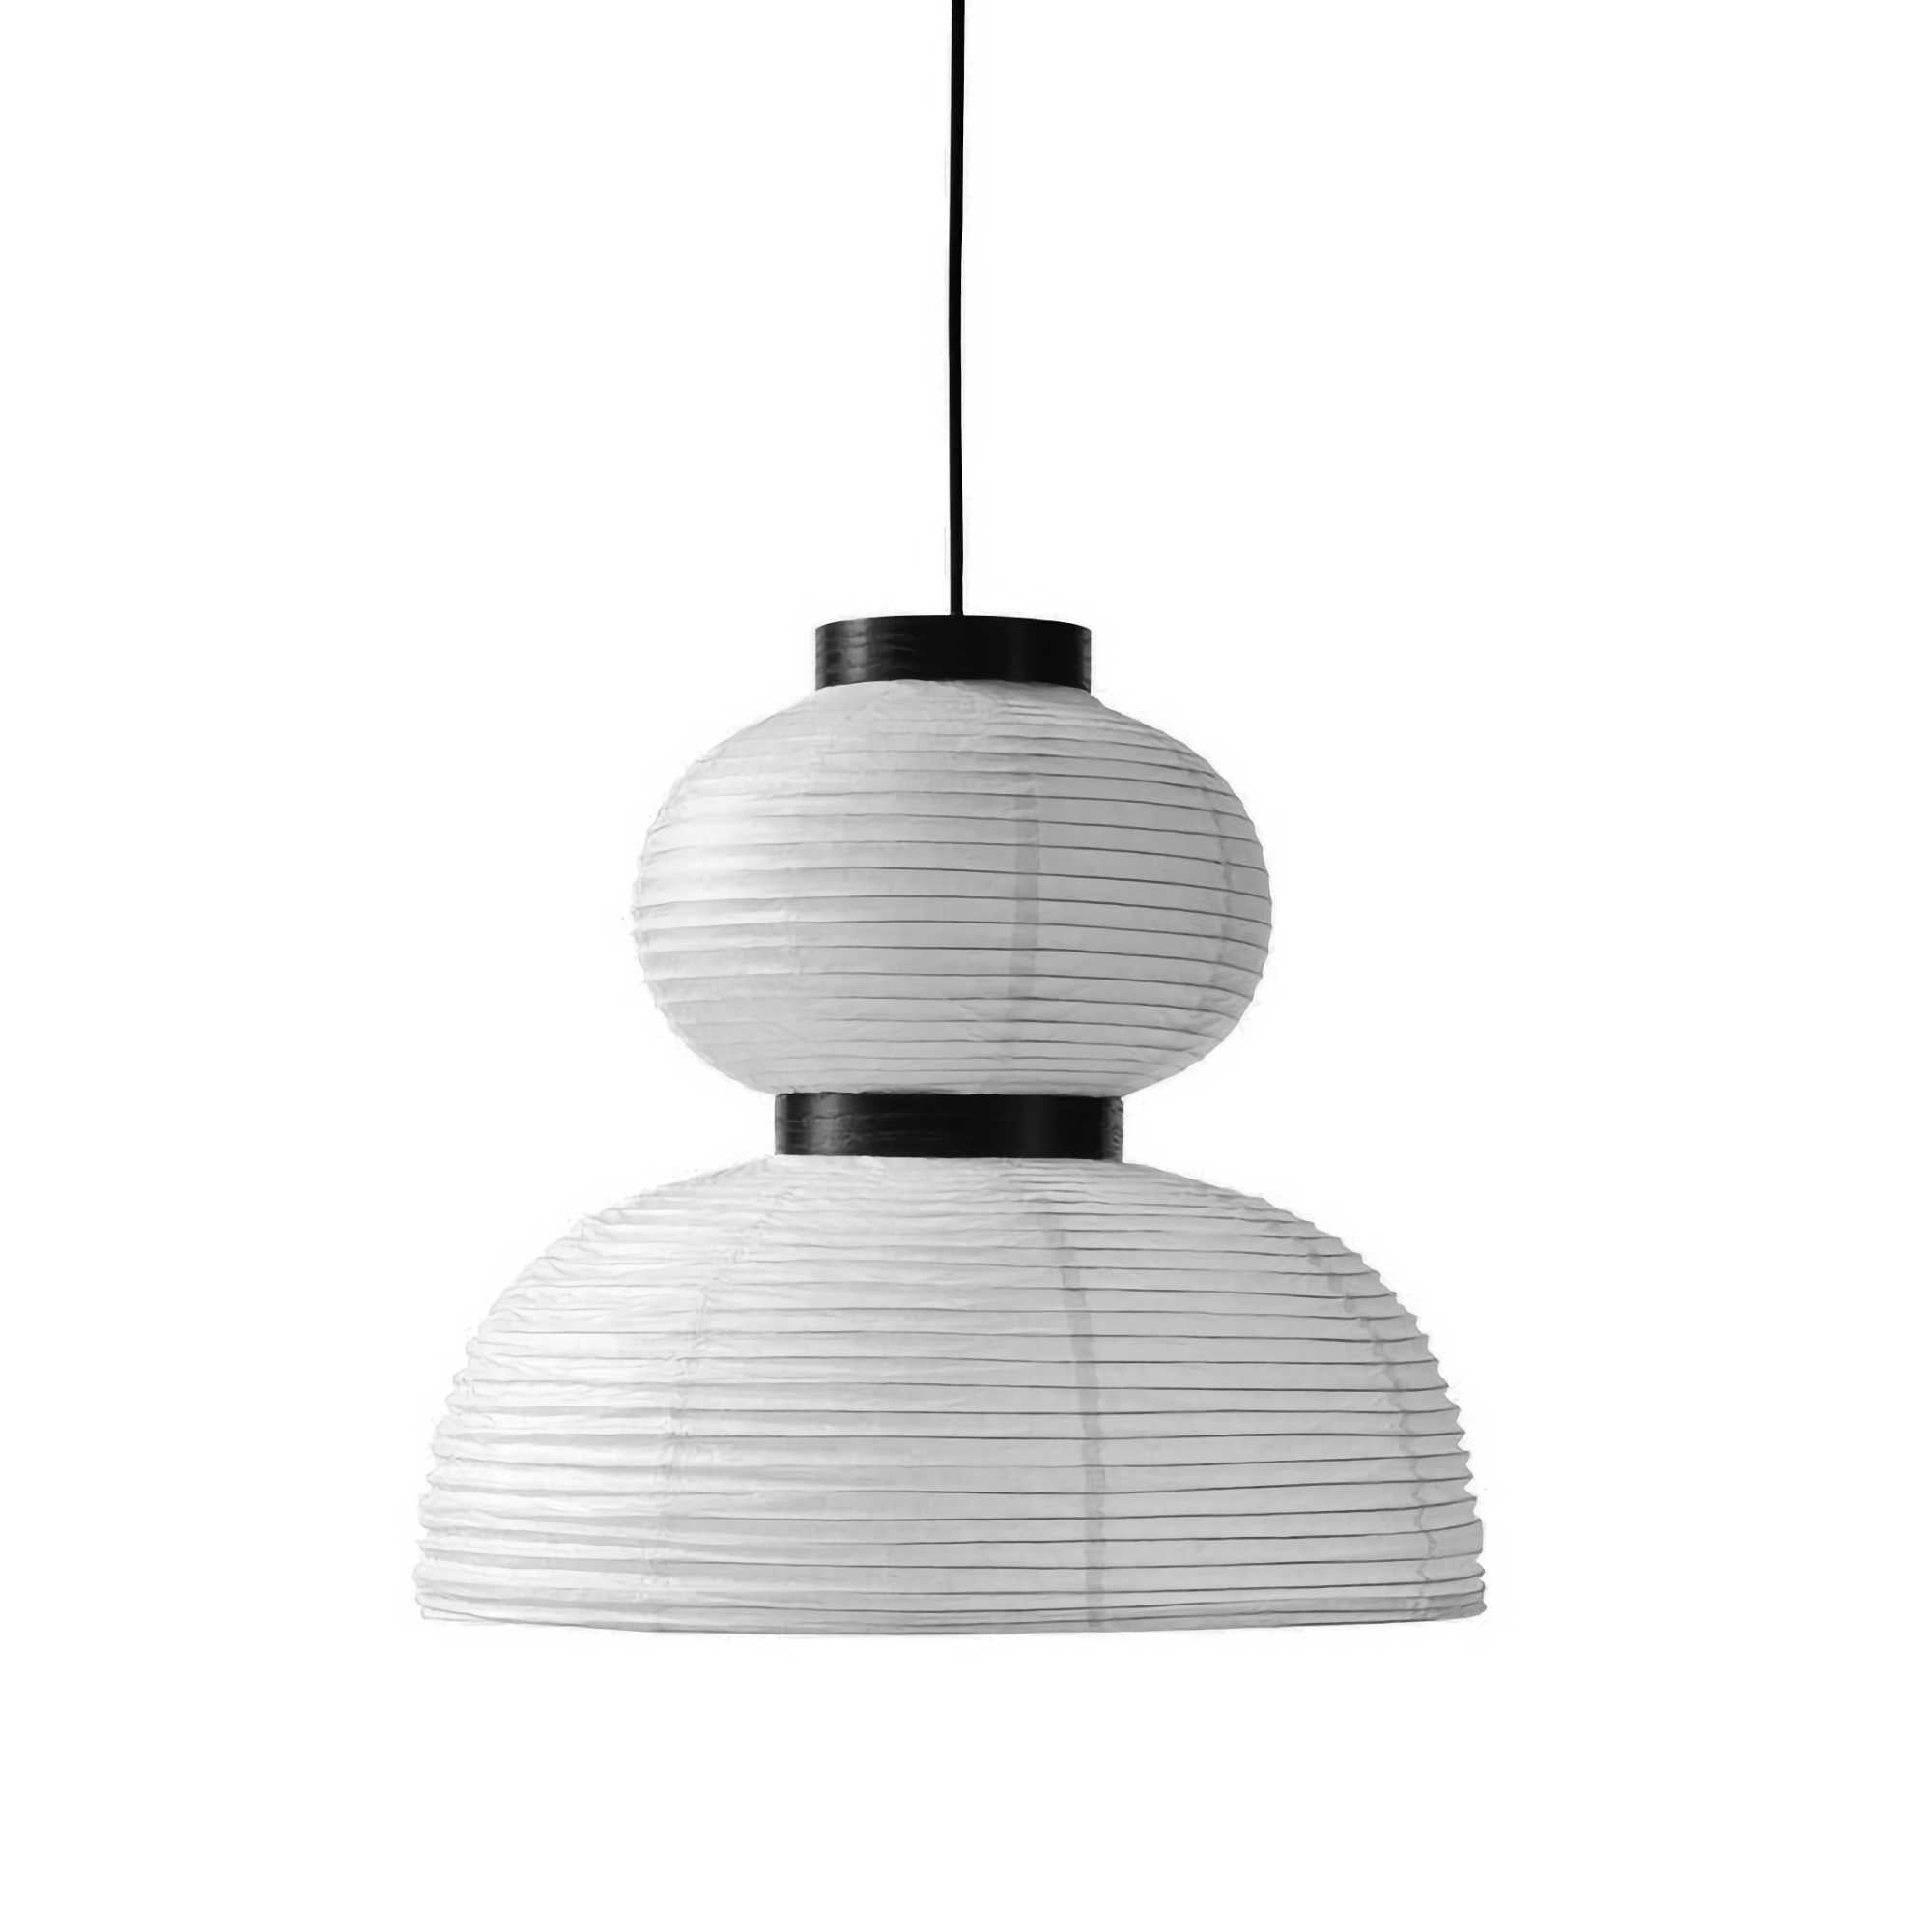 &Tradition JH4 Formakami pendant lamp